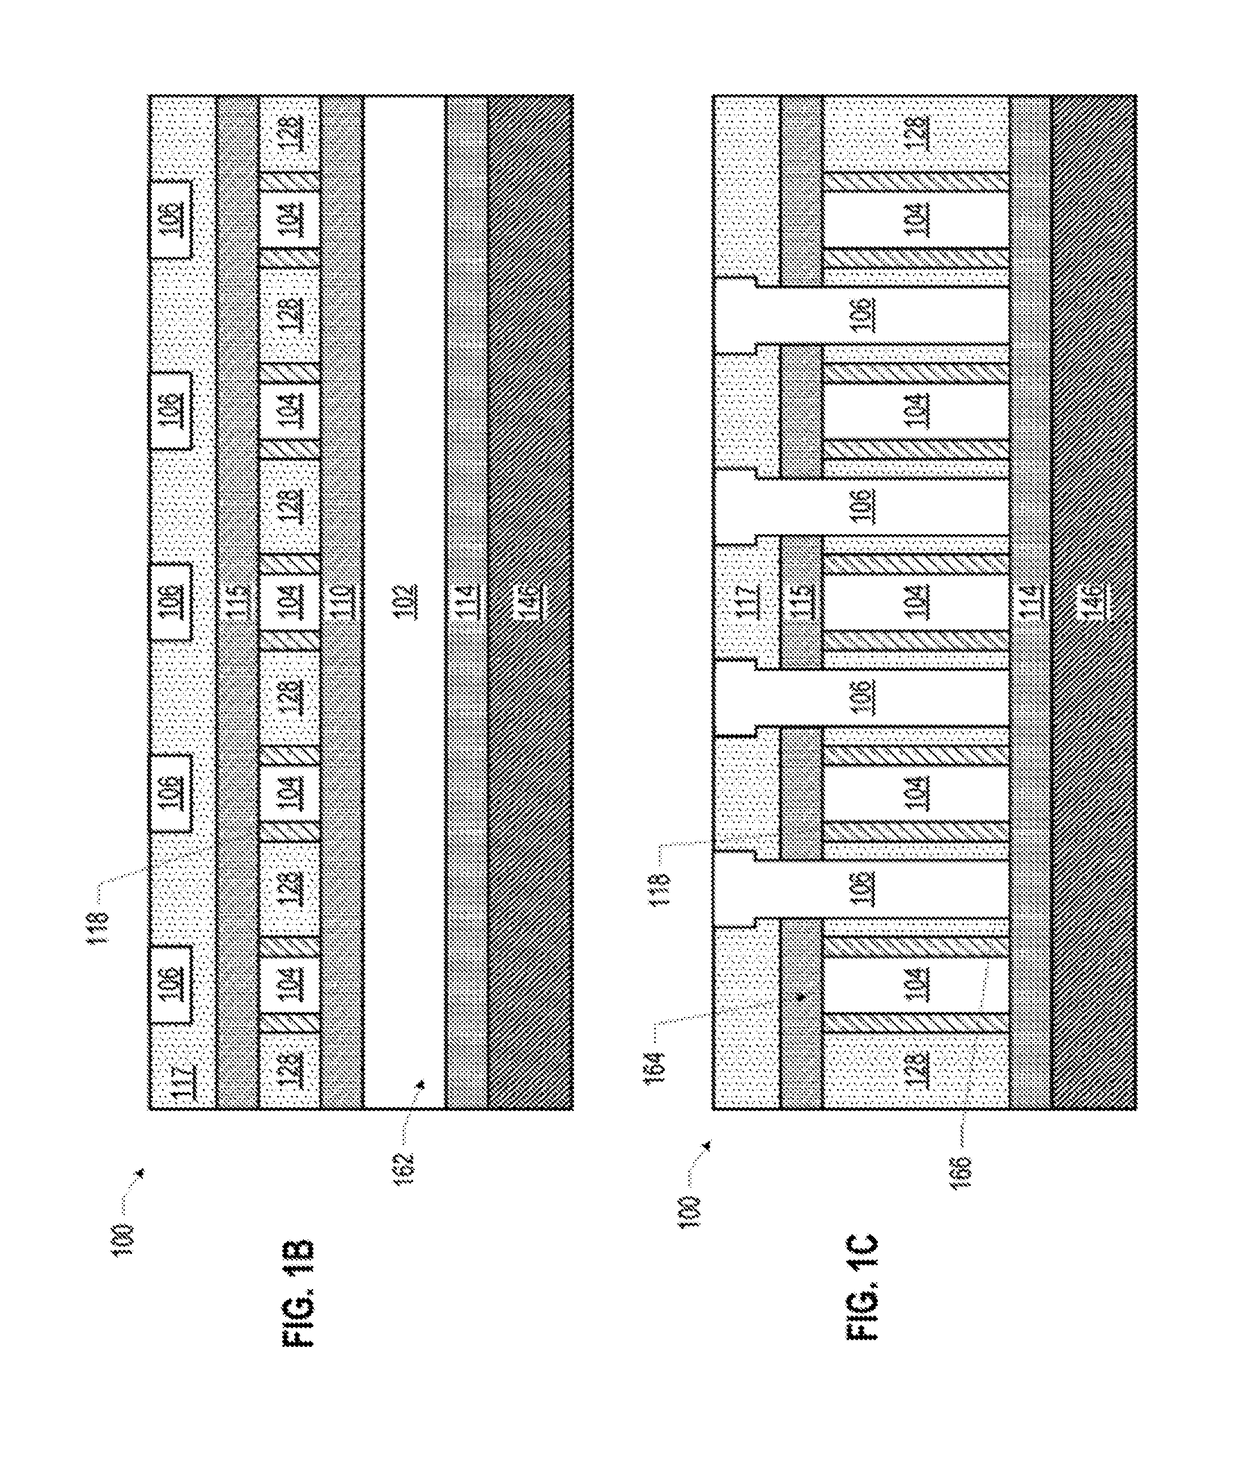 Apparatus and method for scalable qubit addressing